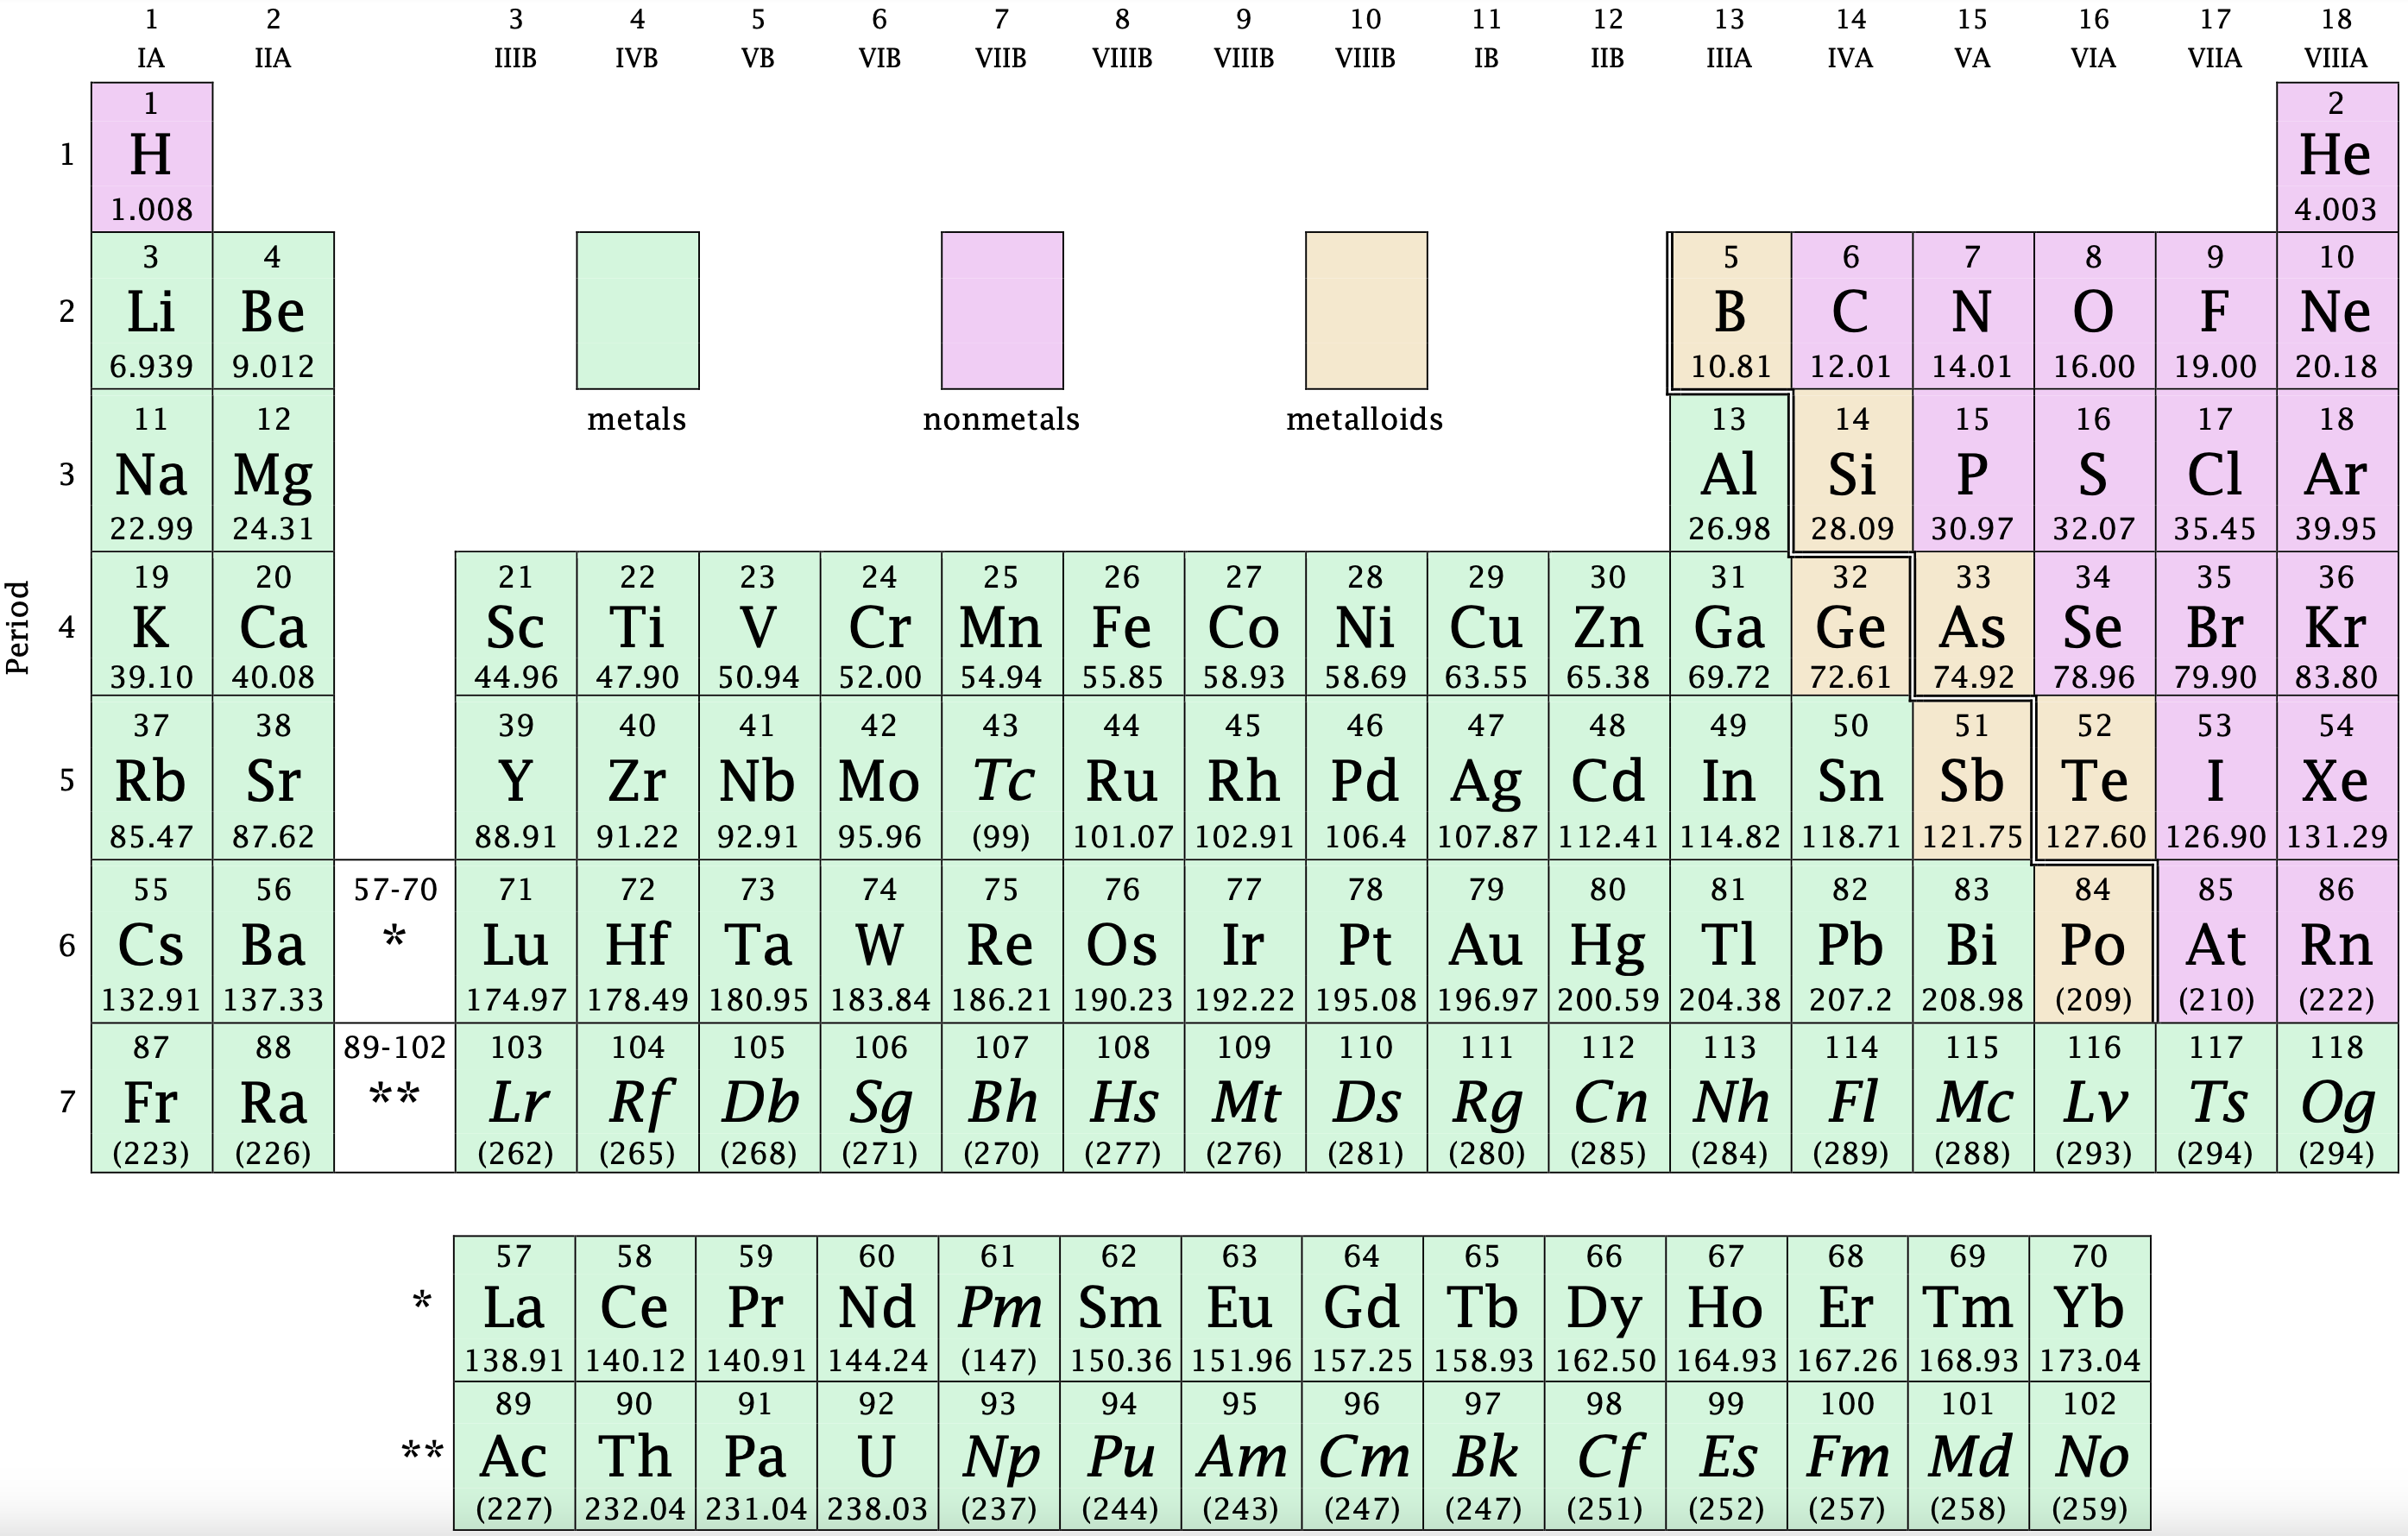 Image of periodic table with groups and periods